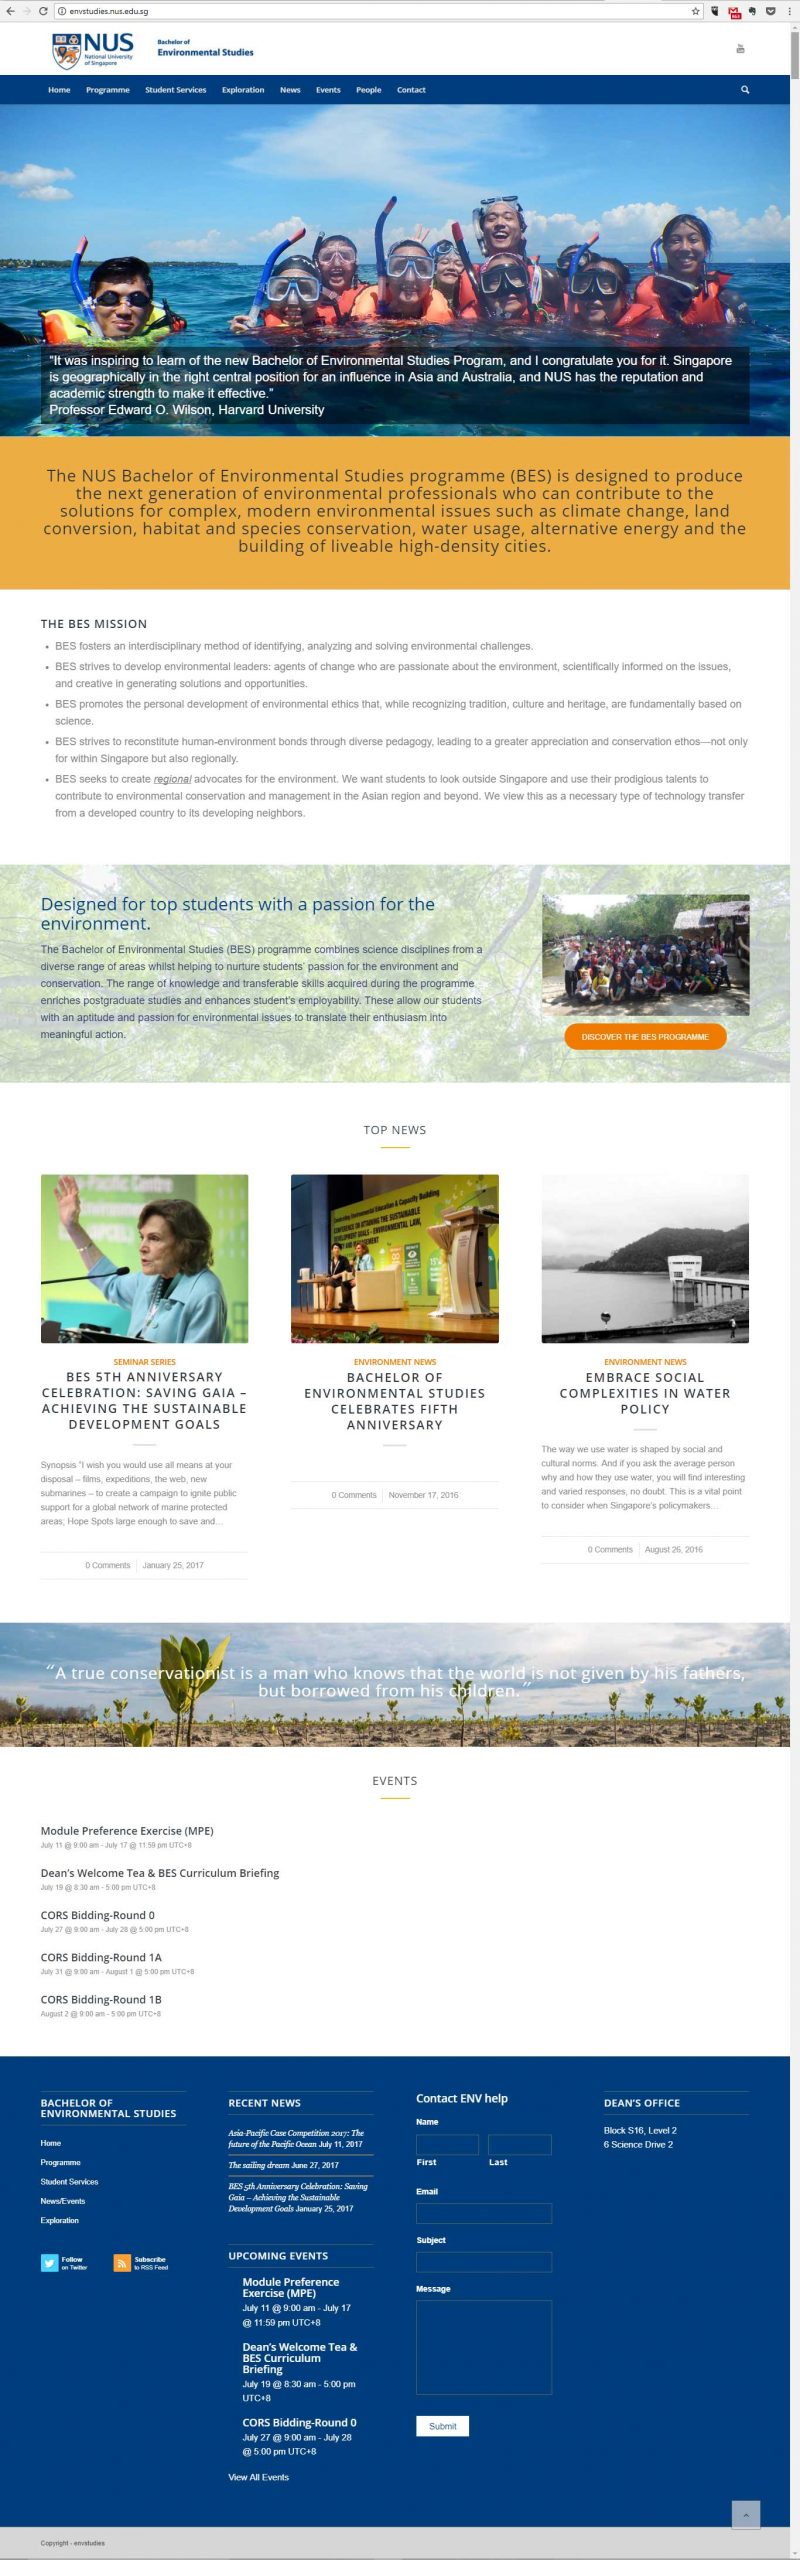 university department home page design